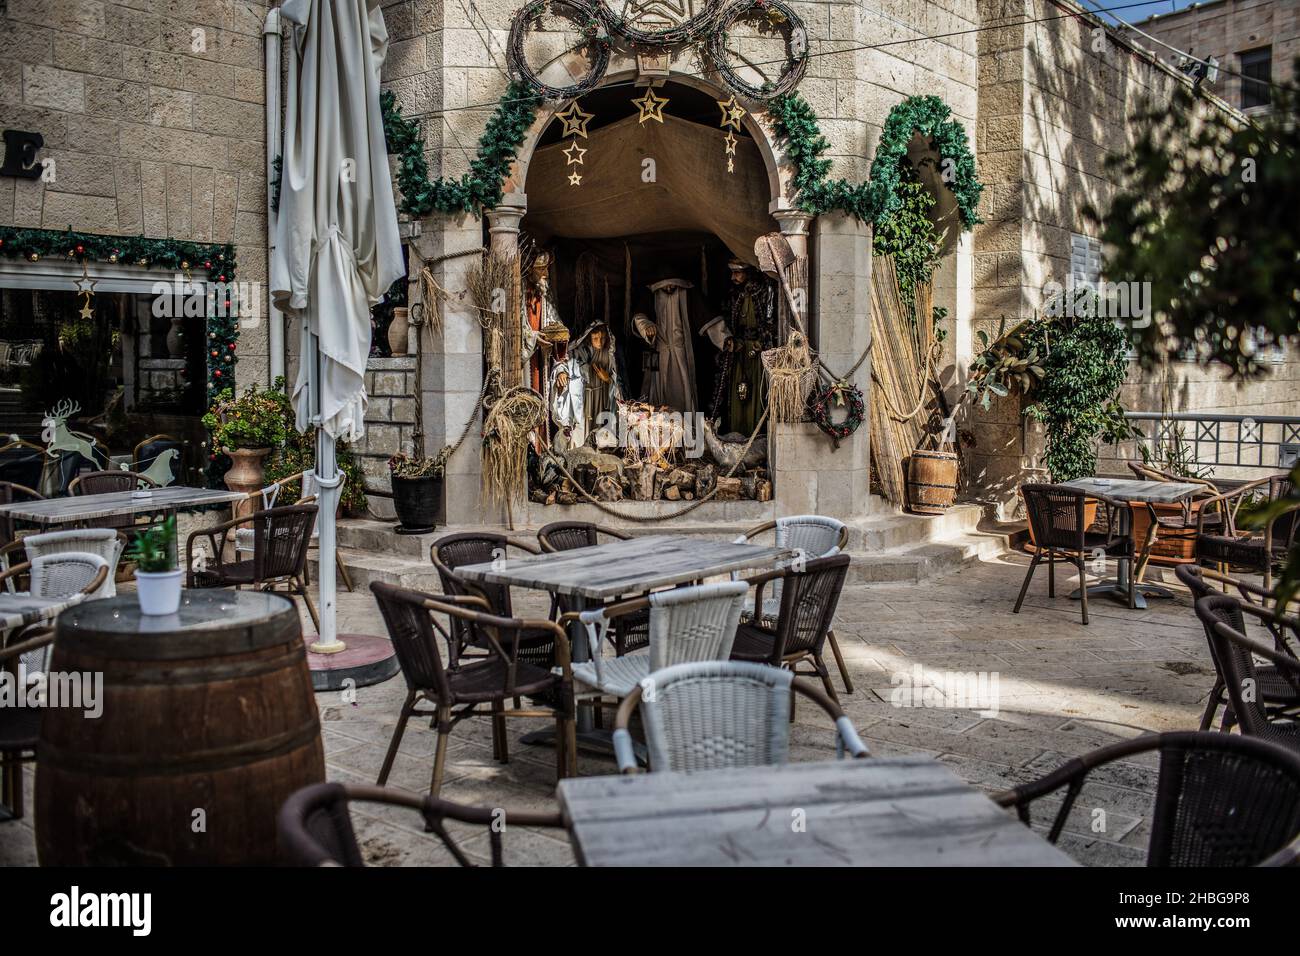 Bethlehem, Palestinian Territories. 15th Dec, 2021. A photo made available on 20 December 2021 shows a nativity scene displayed in an empty coffee shop outside of the Church of Nativity ahead of Christmas. Credit: Ilia Yefimovich/dpa/Alamy Live News Stock Photo